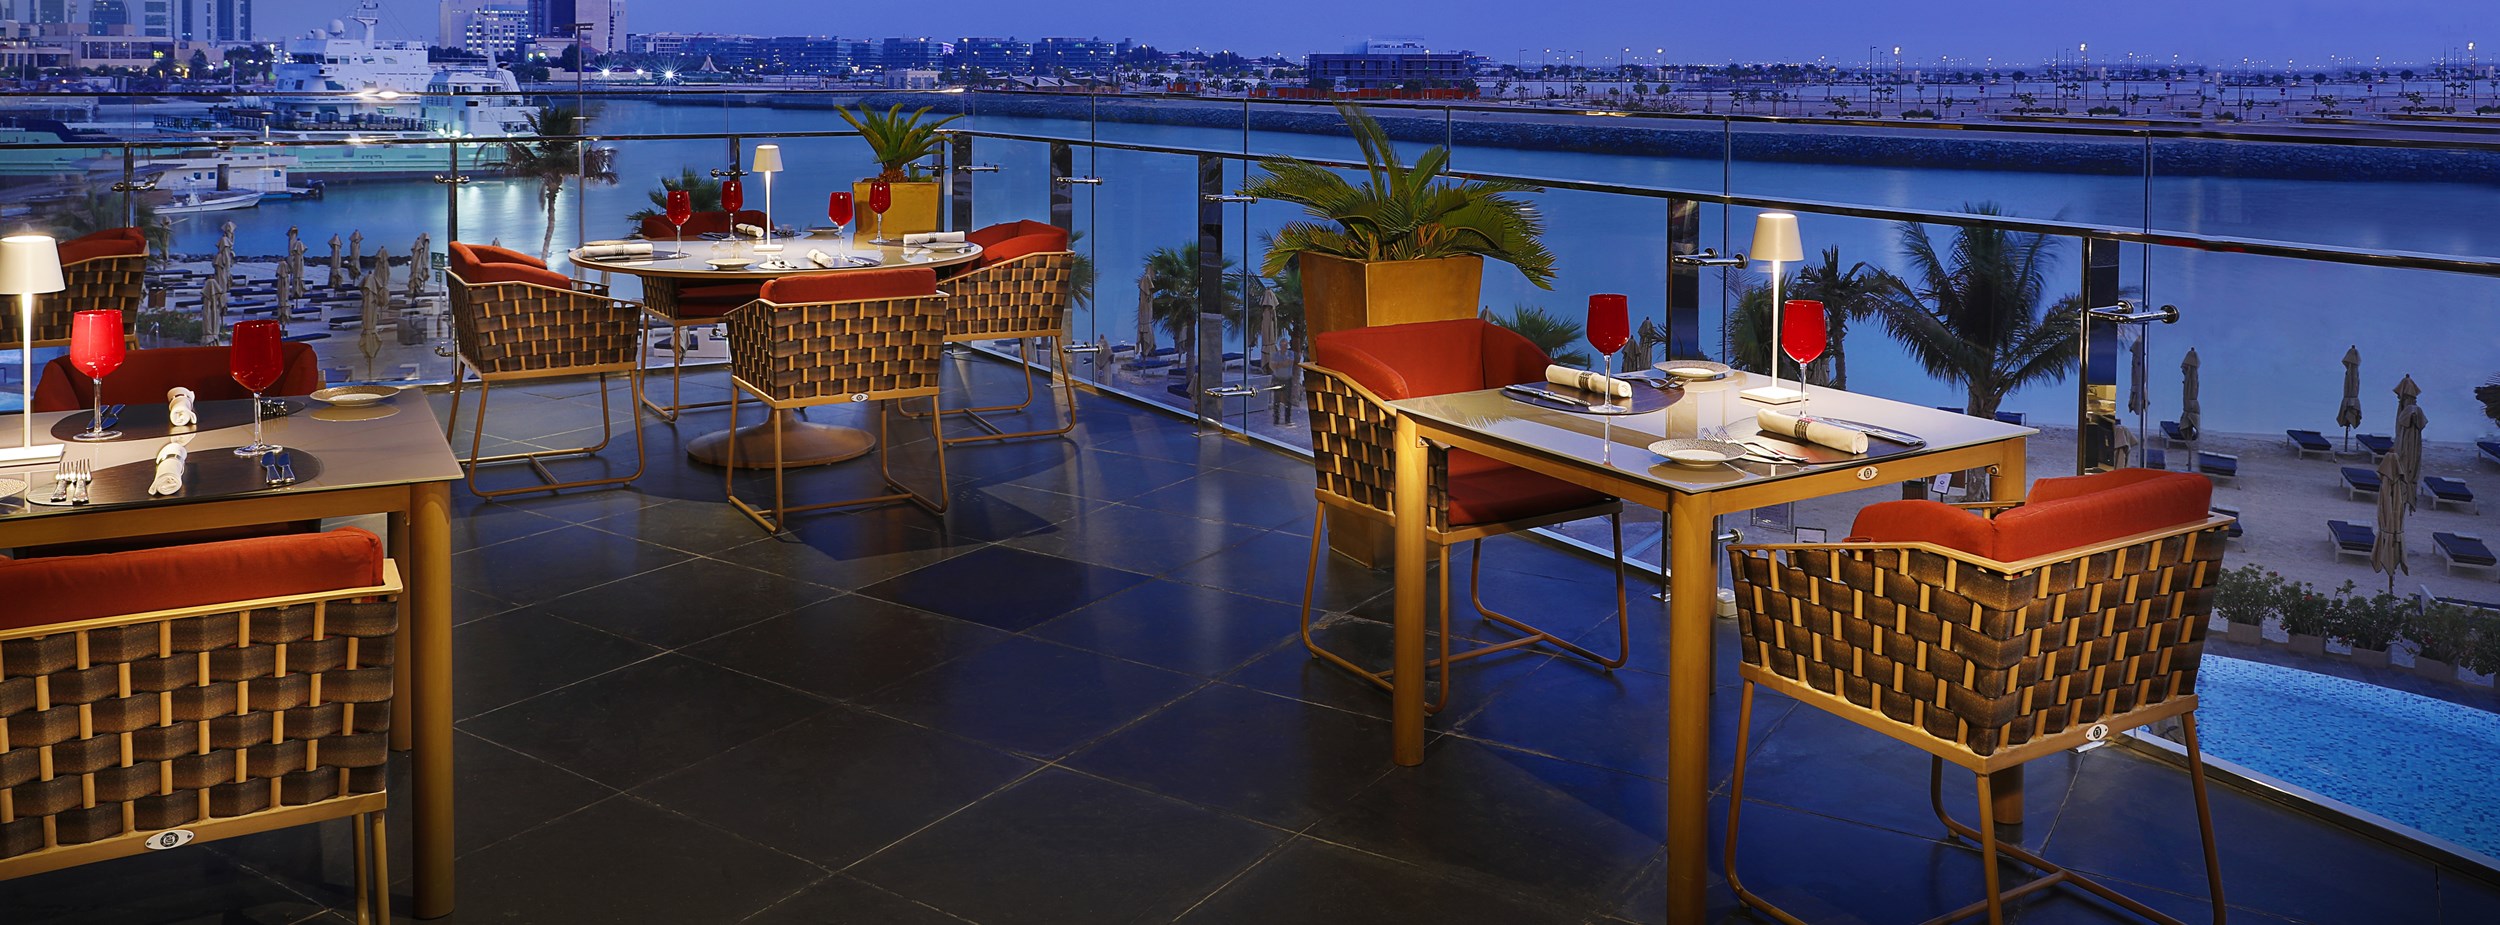 Dining area on a terrace overlooking the waters and skyline of Abu Dhabi